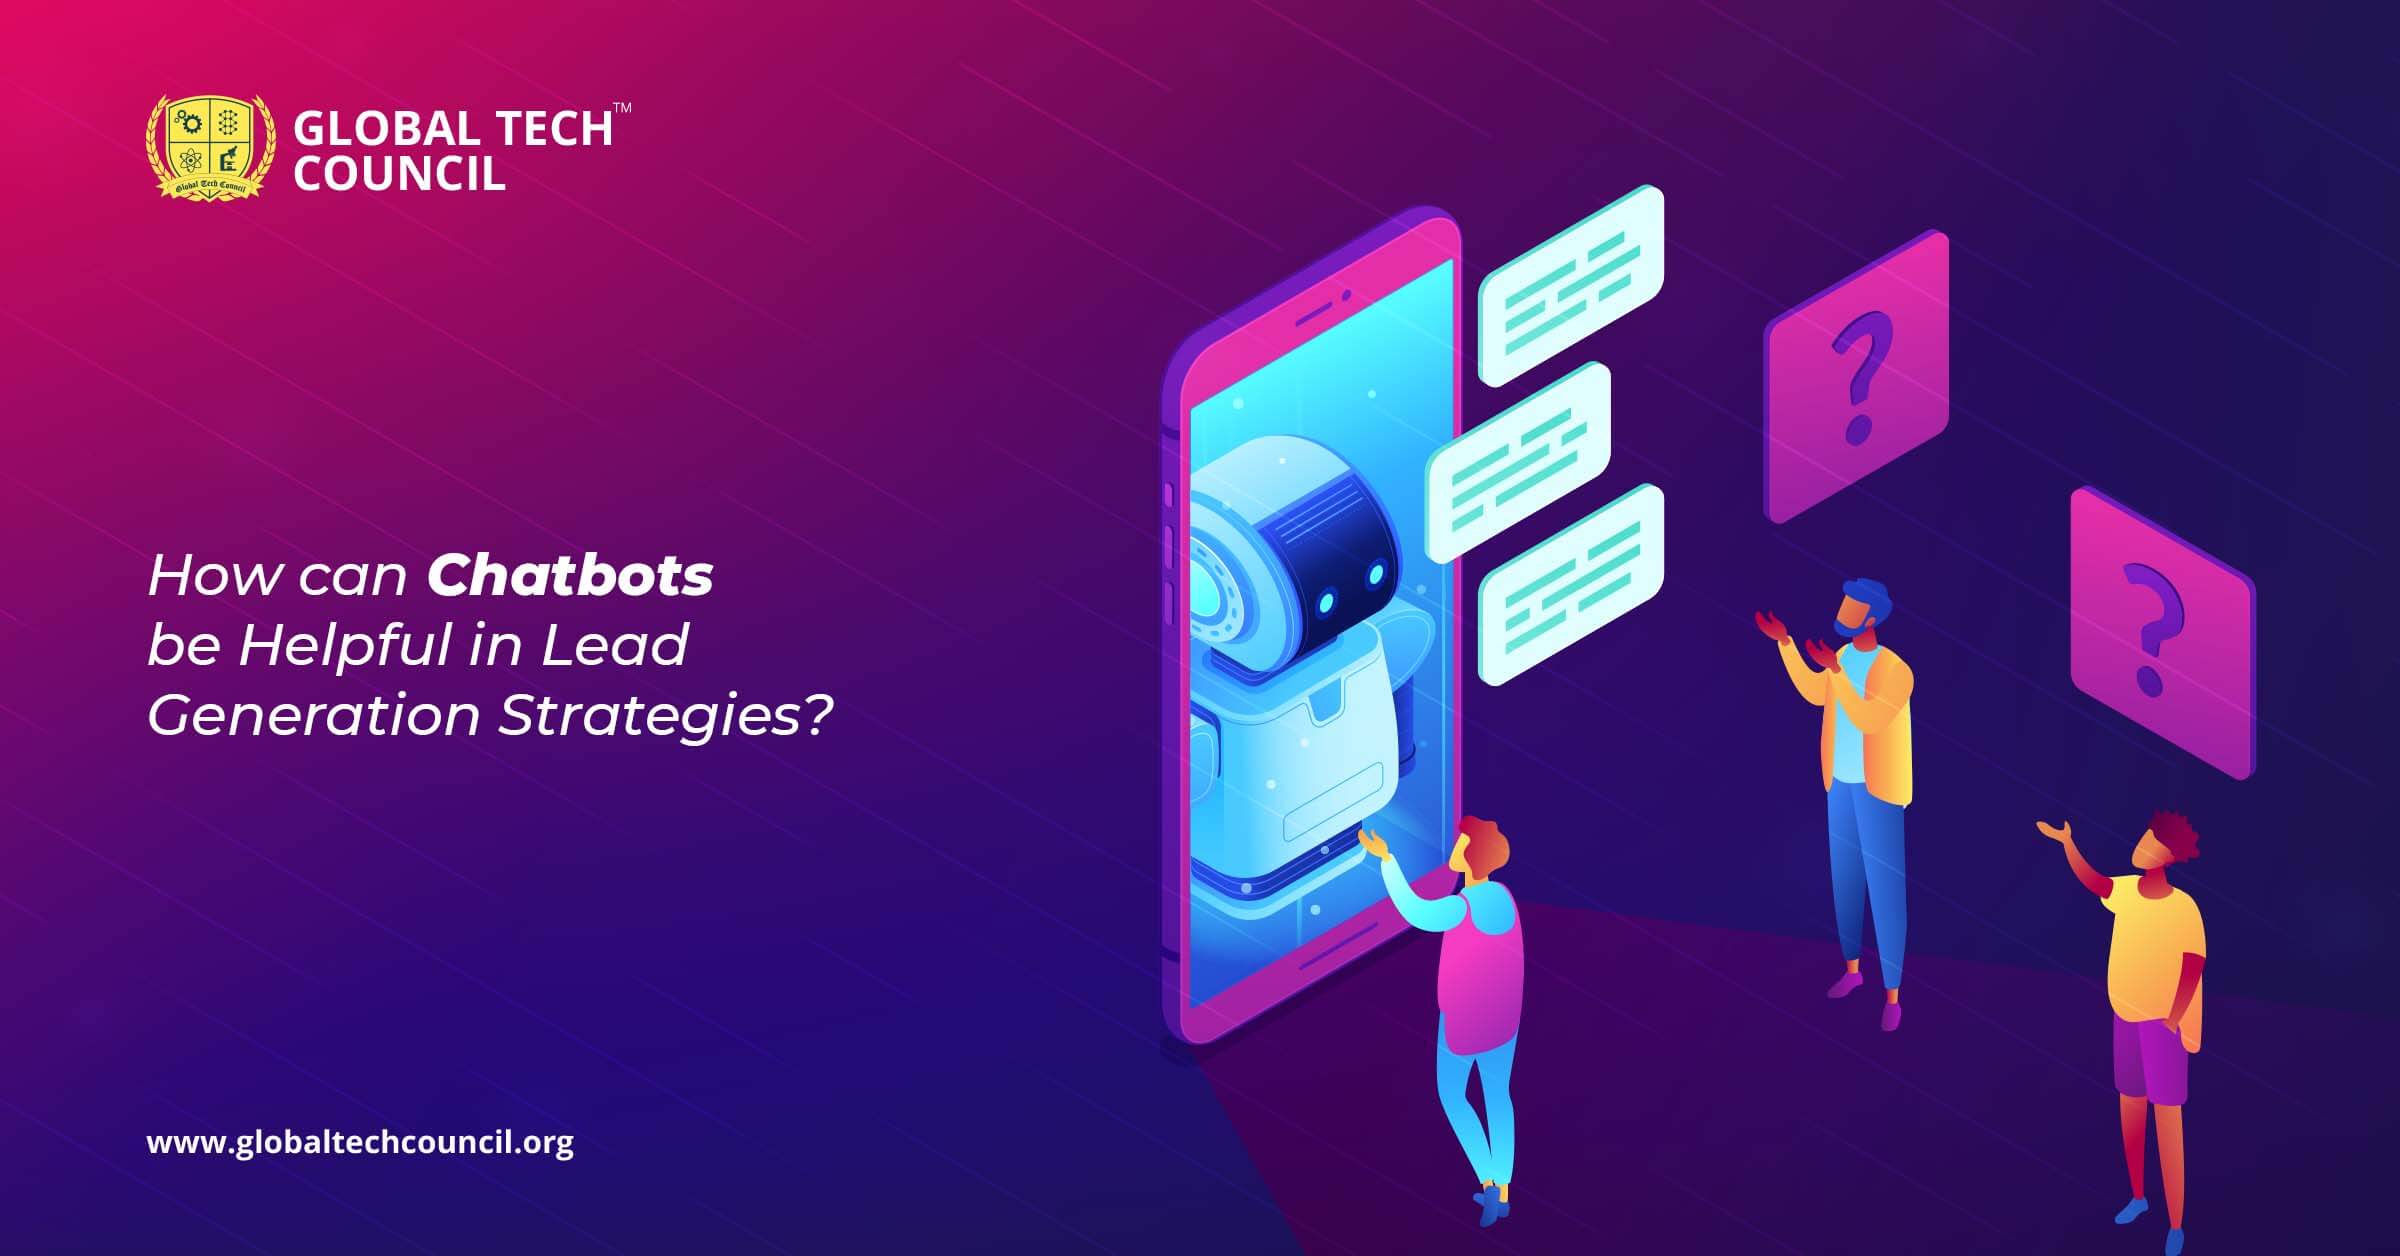 How can Chatbots be Helpful in Lead Generation Strategies